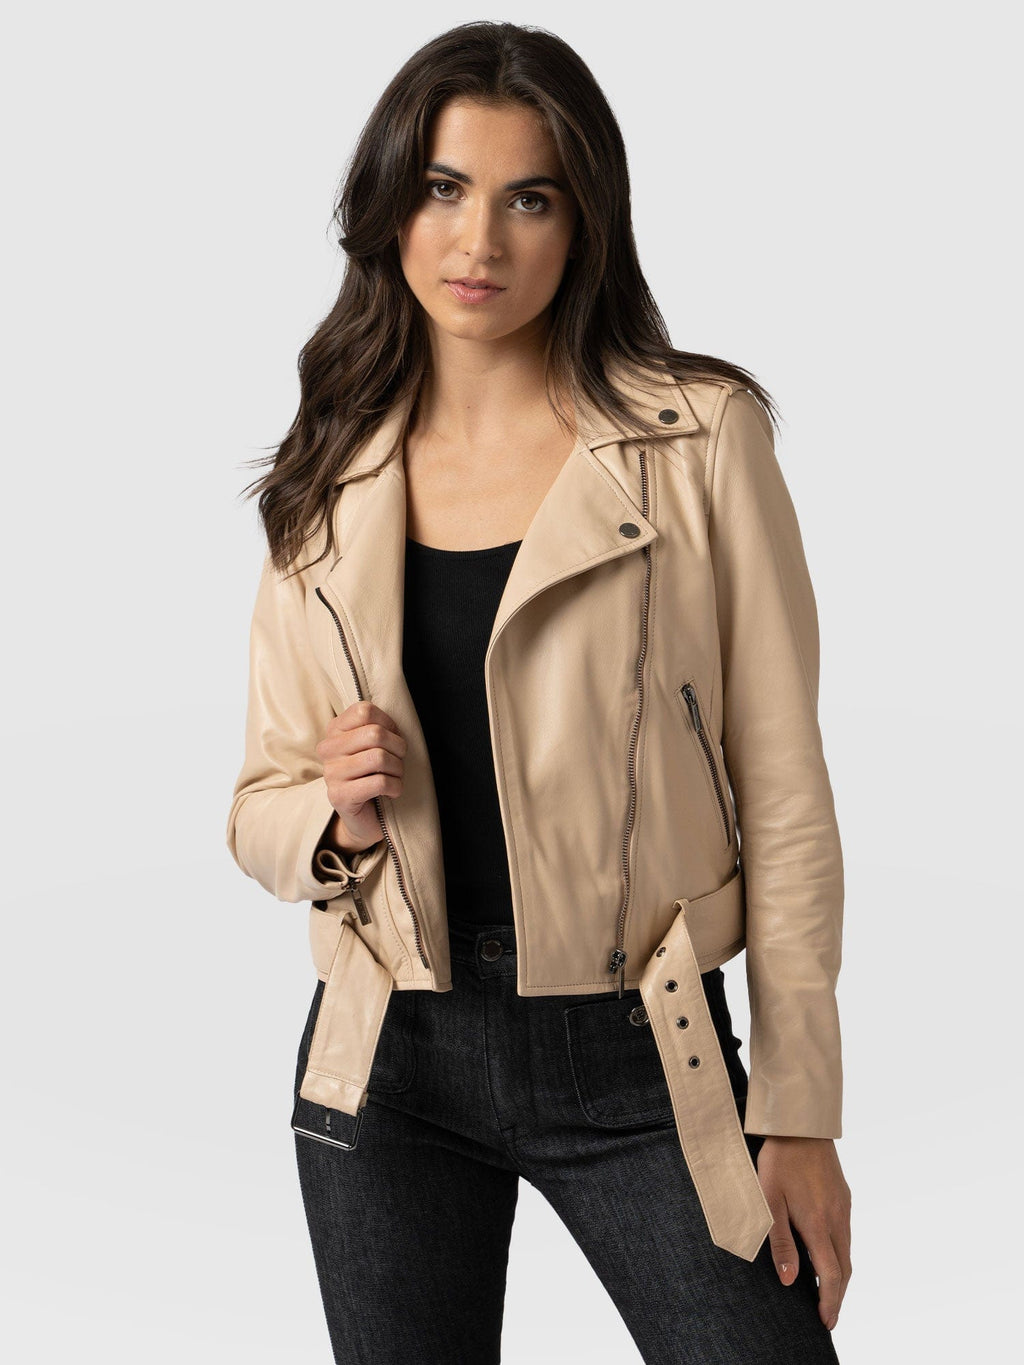 Luther Leather Jacket Nude - Women's Leather Jacket